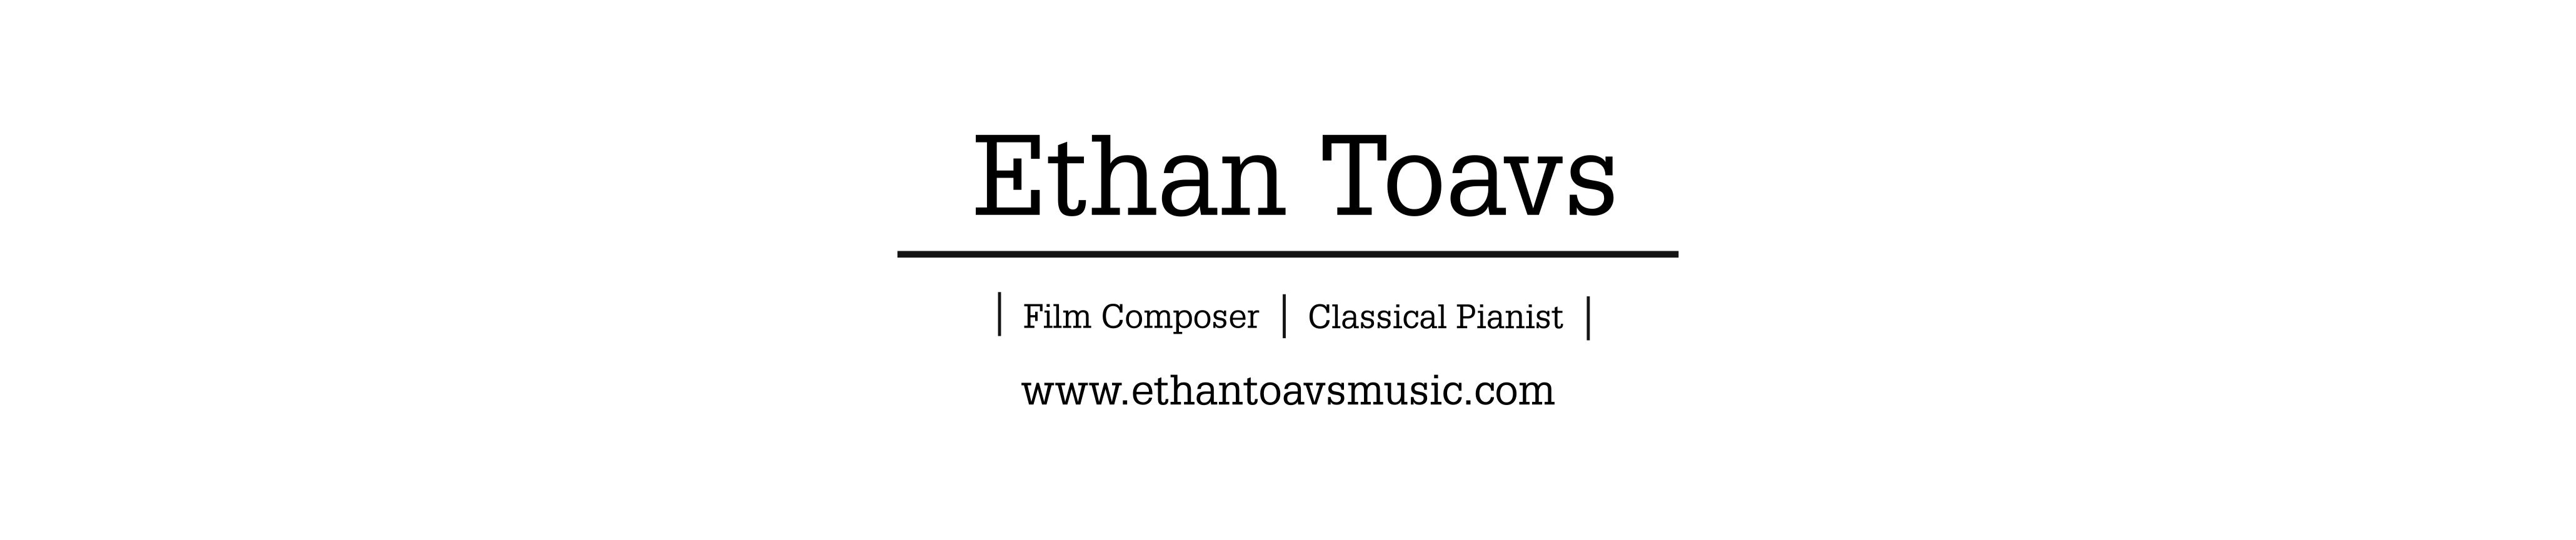 Stream Ethan Toavs music | Listen to songs, albums, playlists for free on  SoundCloud